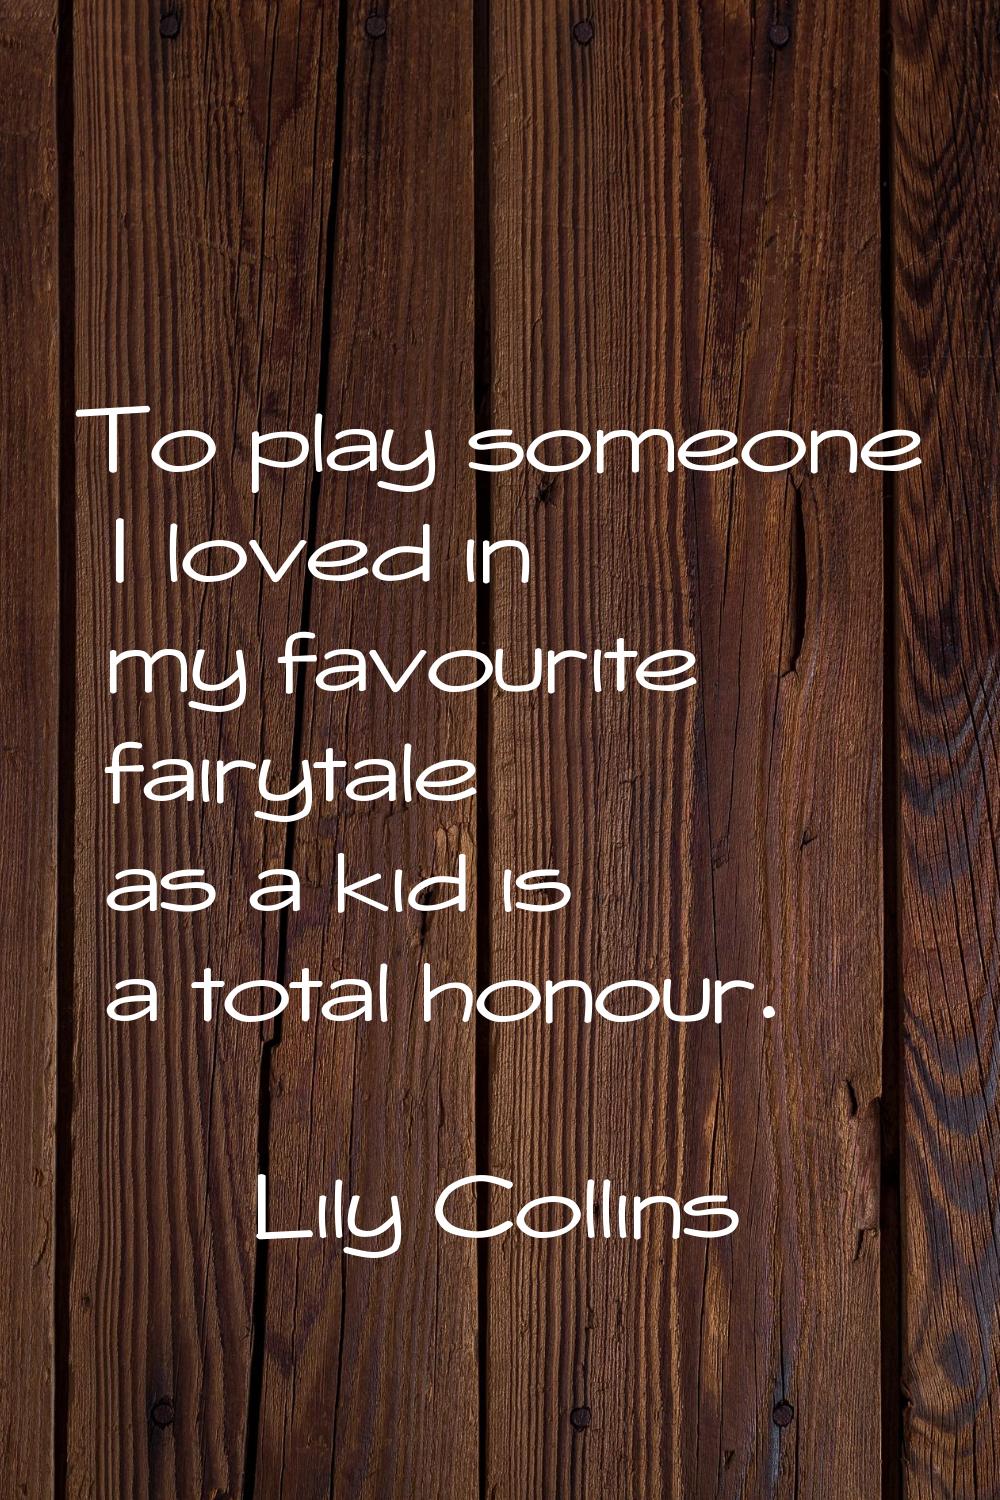 To play someone I loved in my favourite fairytale as a kid is a total honour.